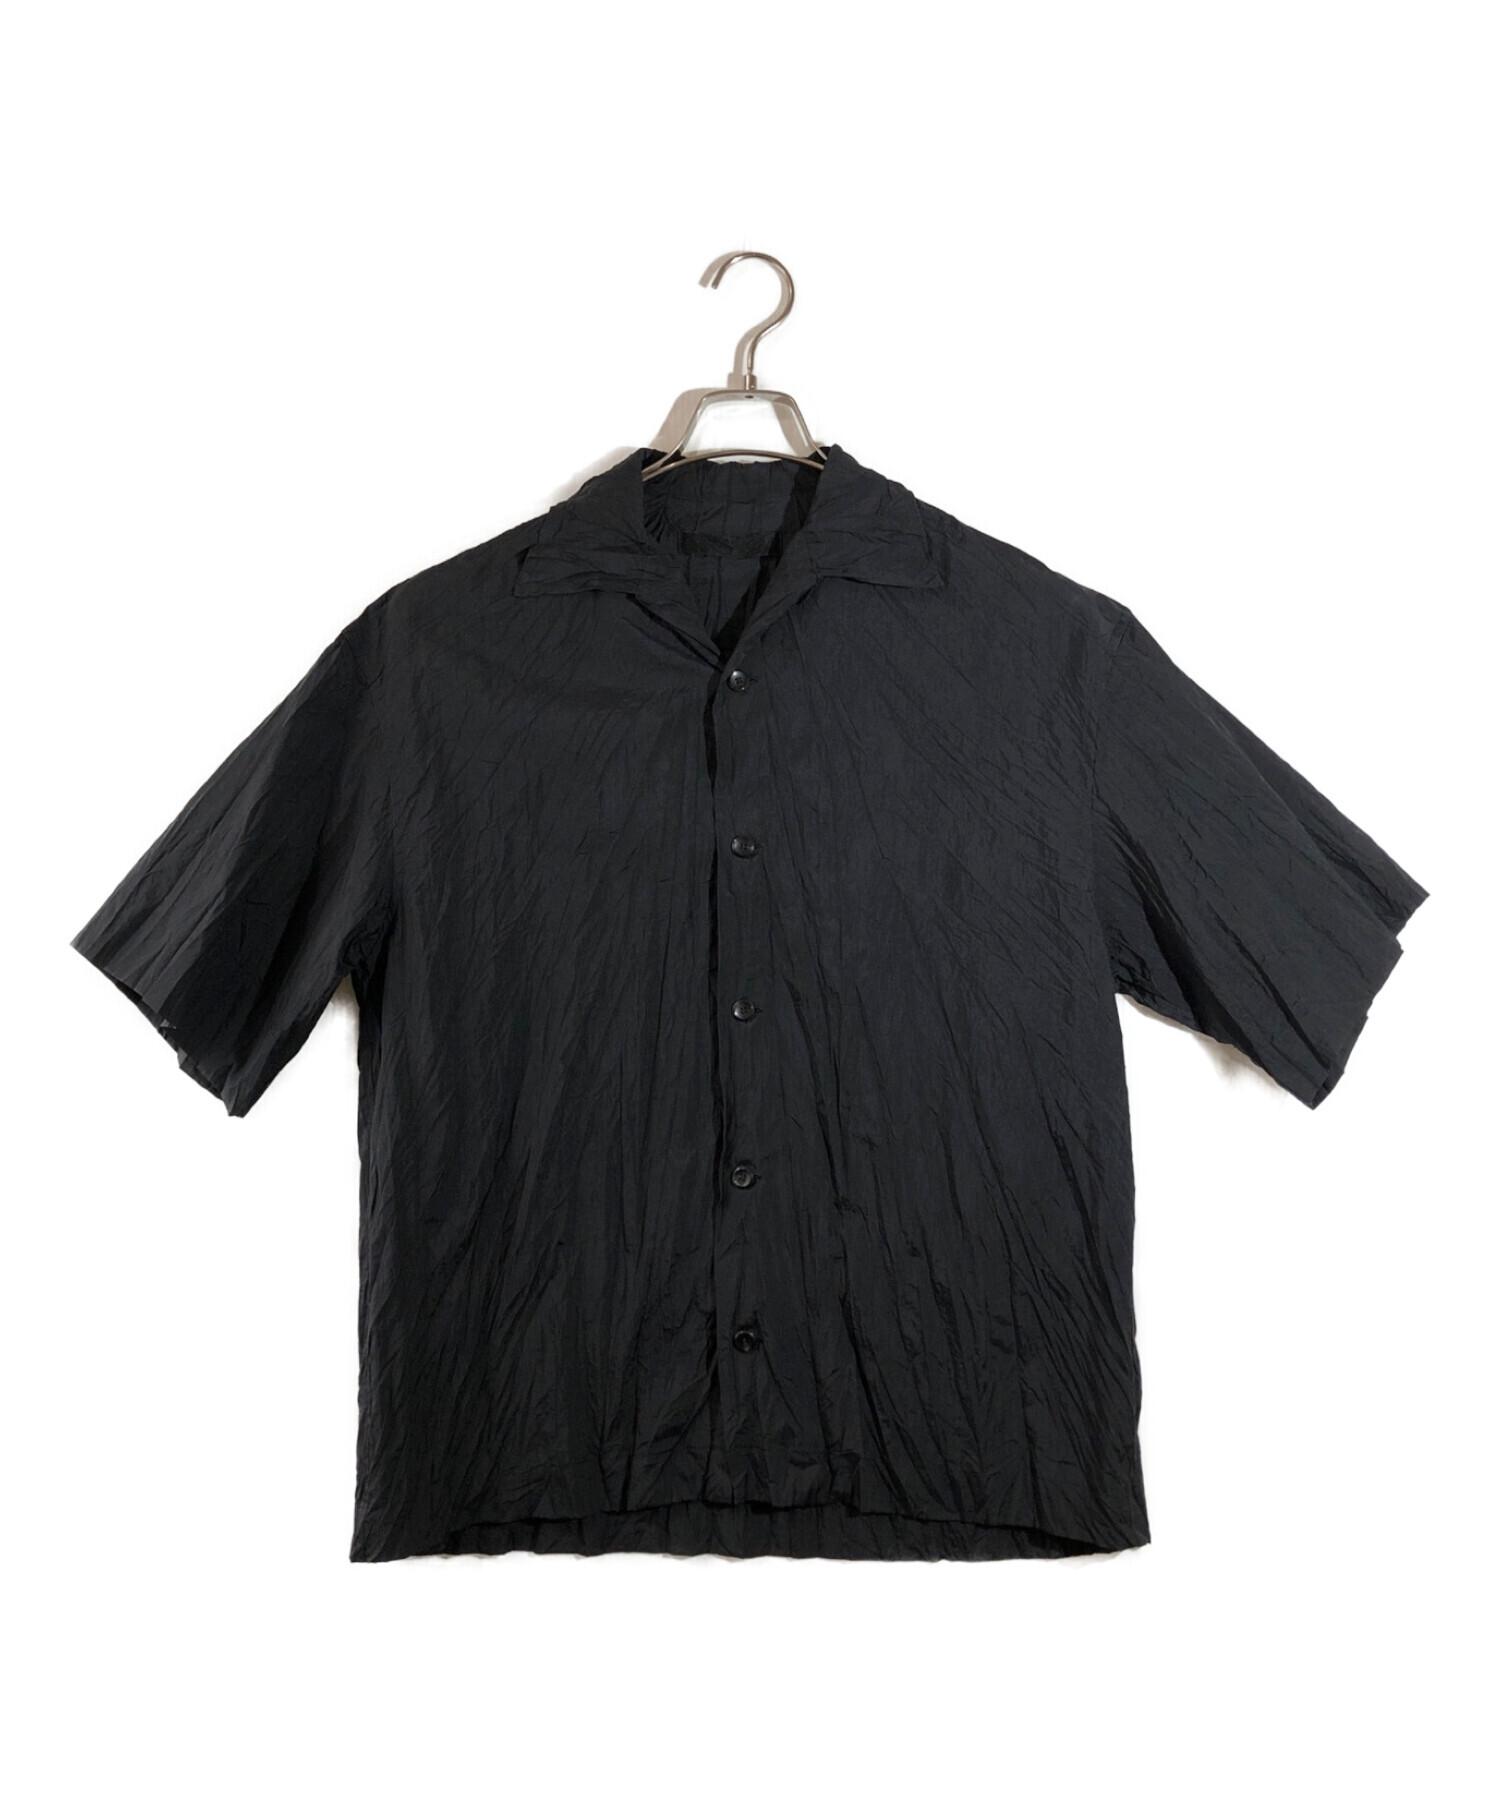 th products SHRINK OPEN Collar Shirt